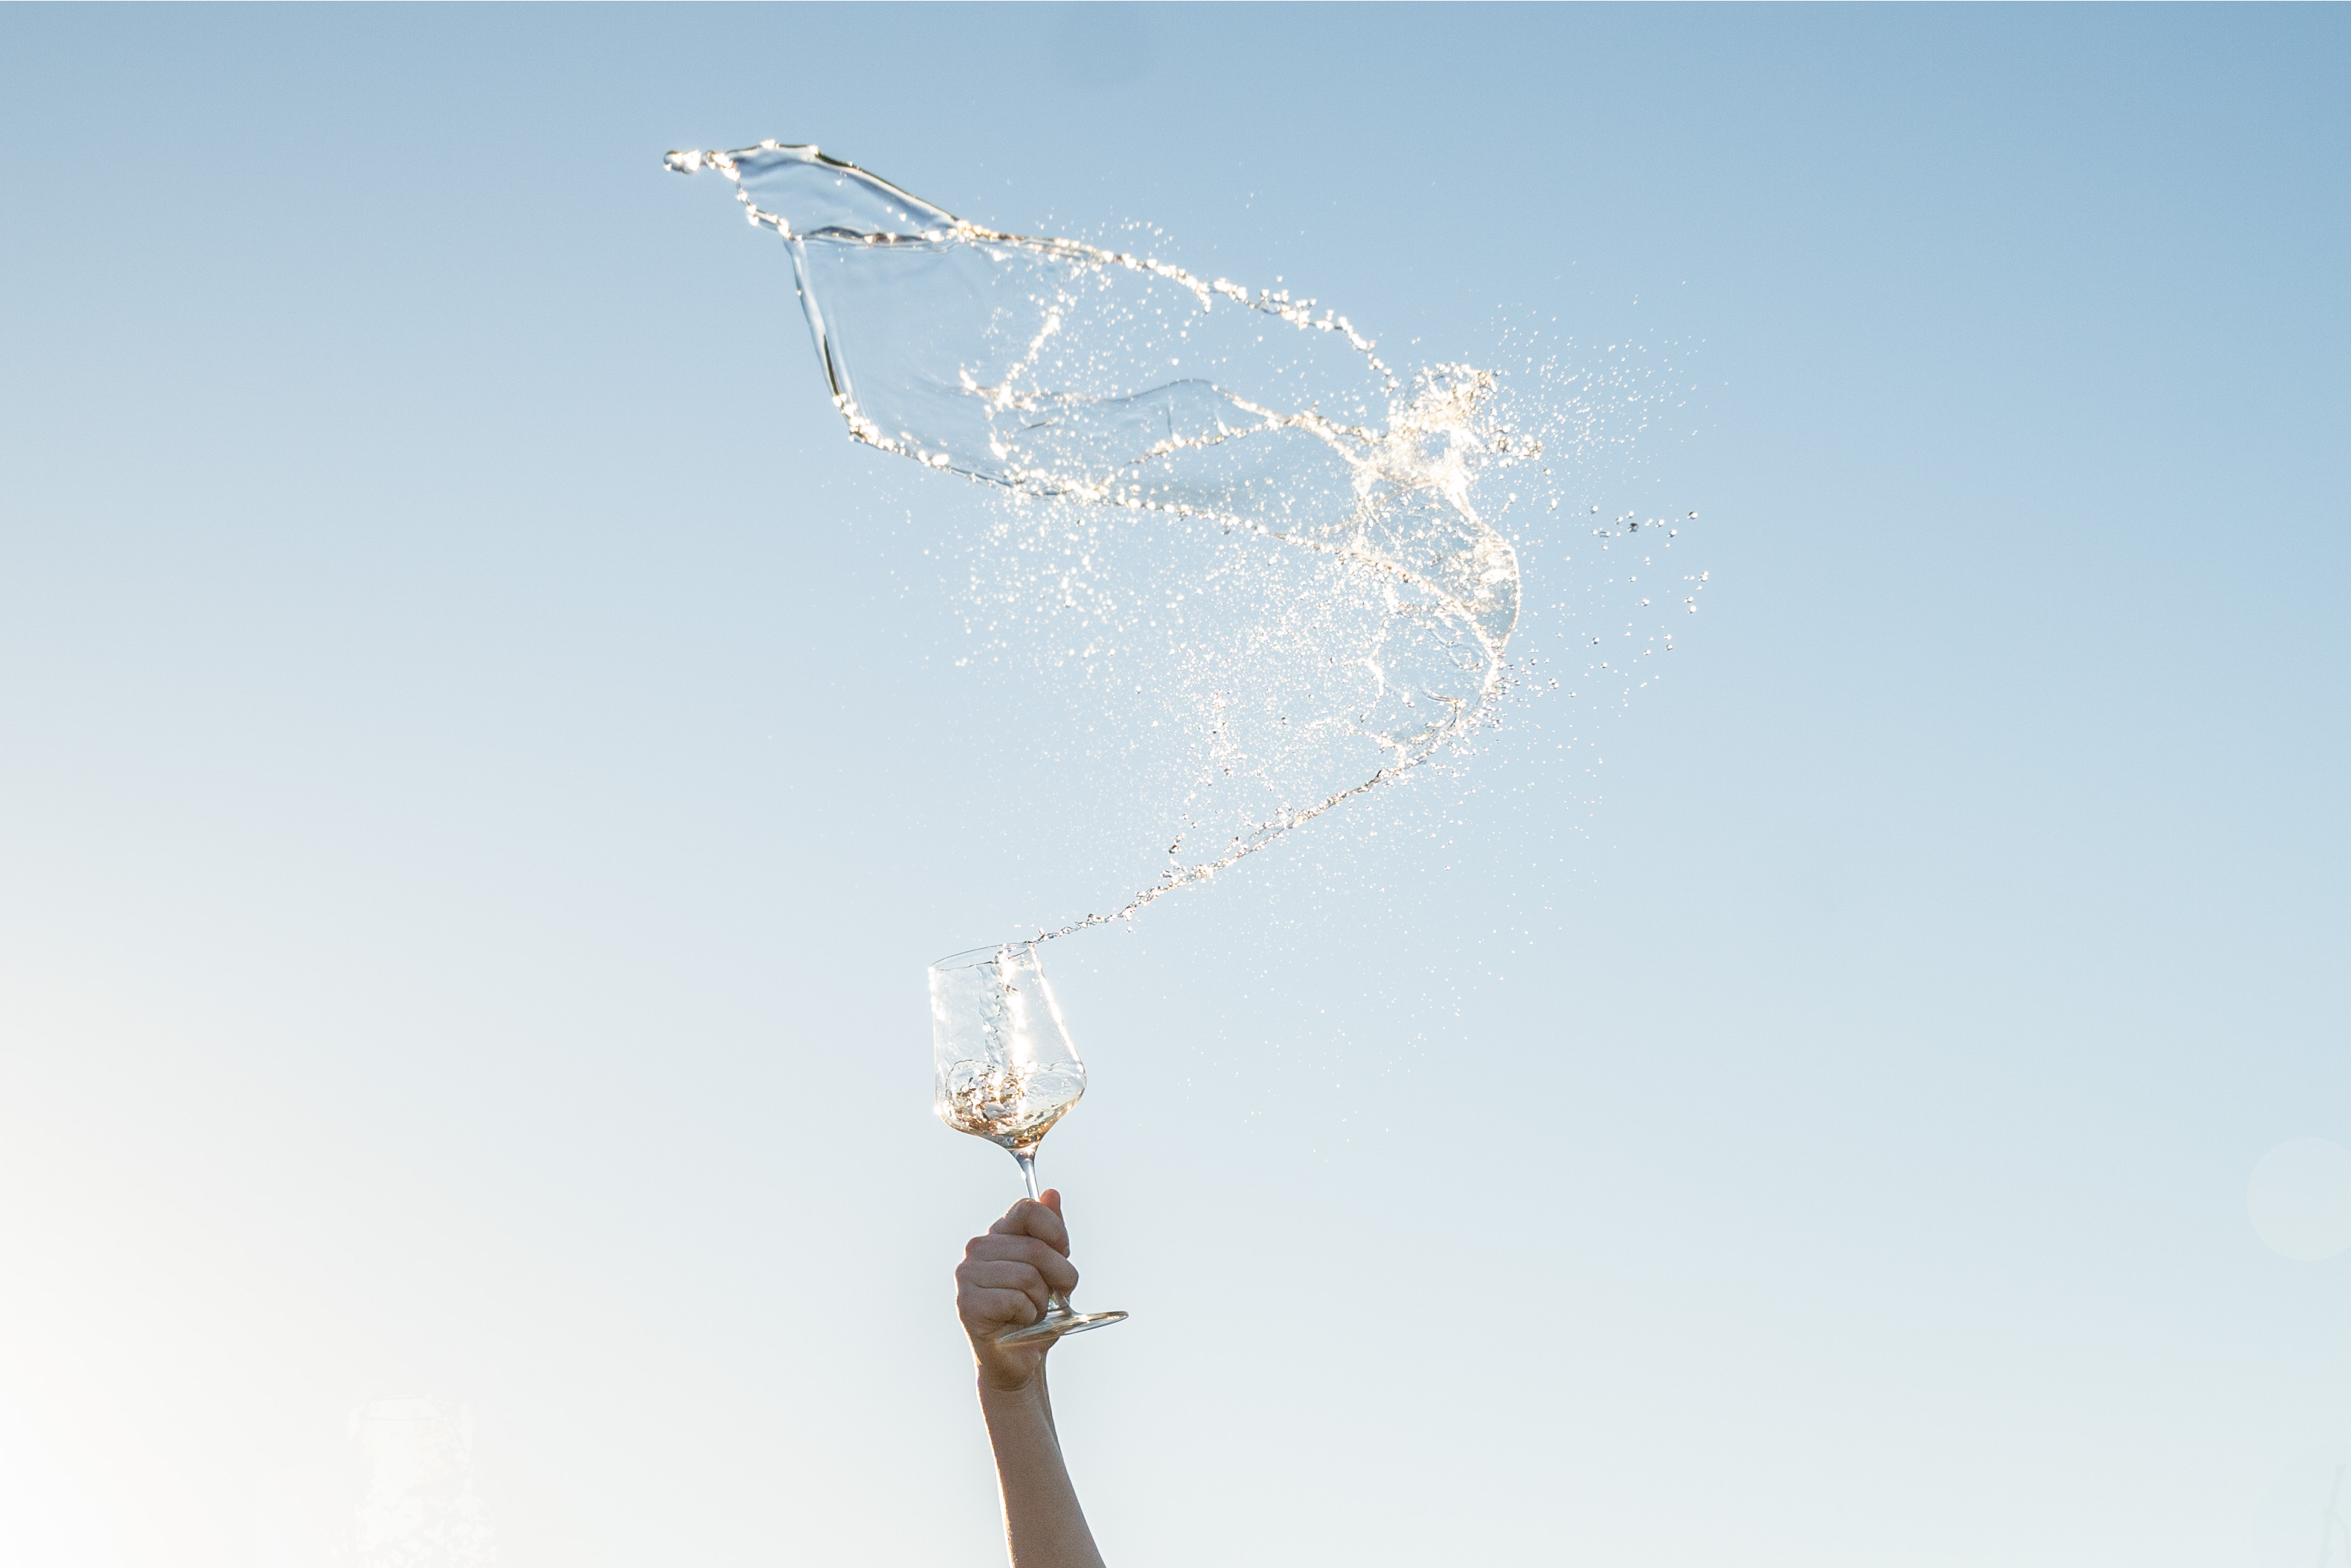 Wine being sprayed in the sky.